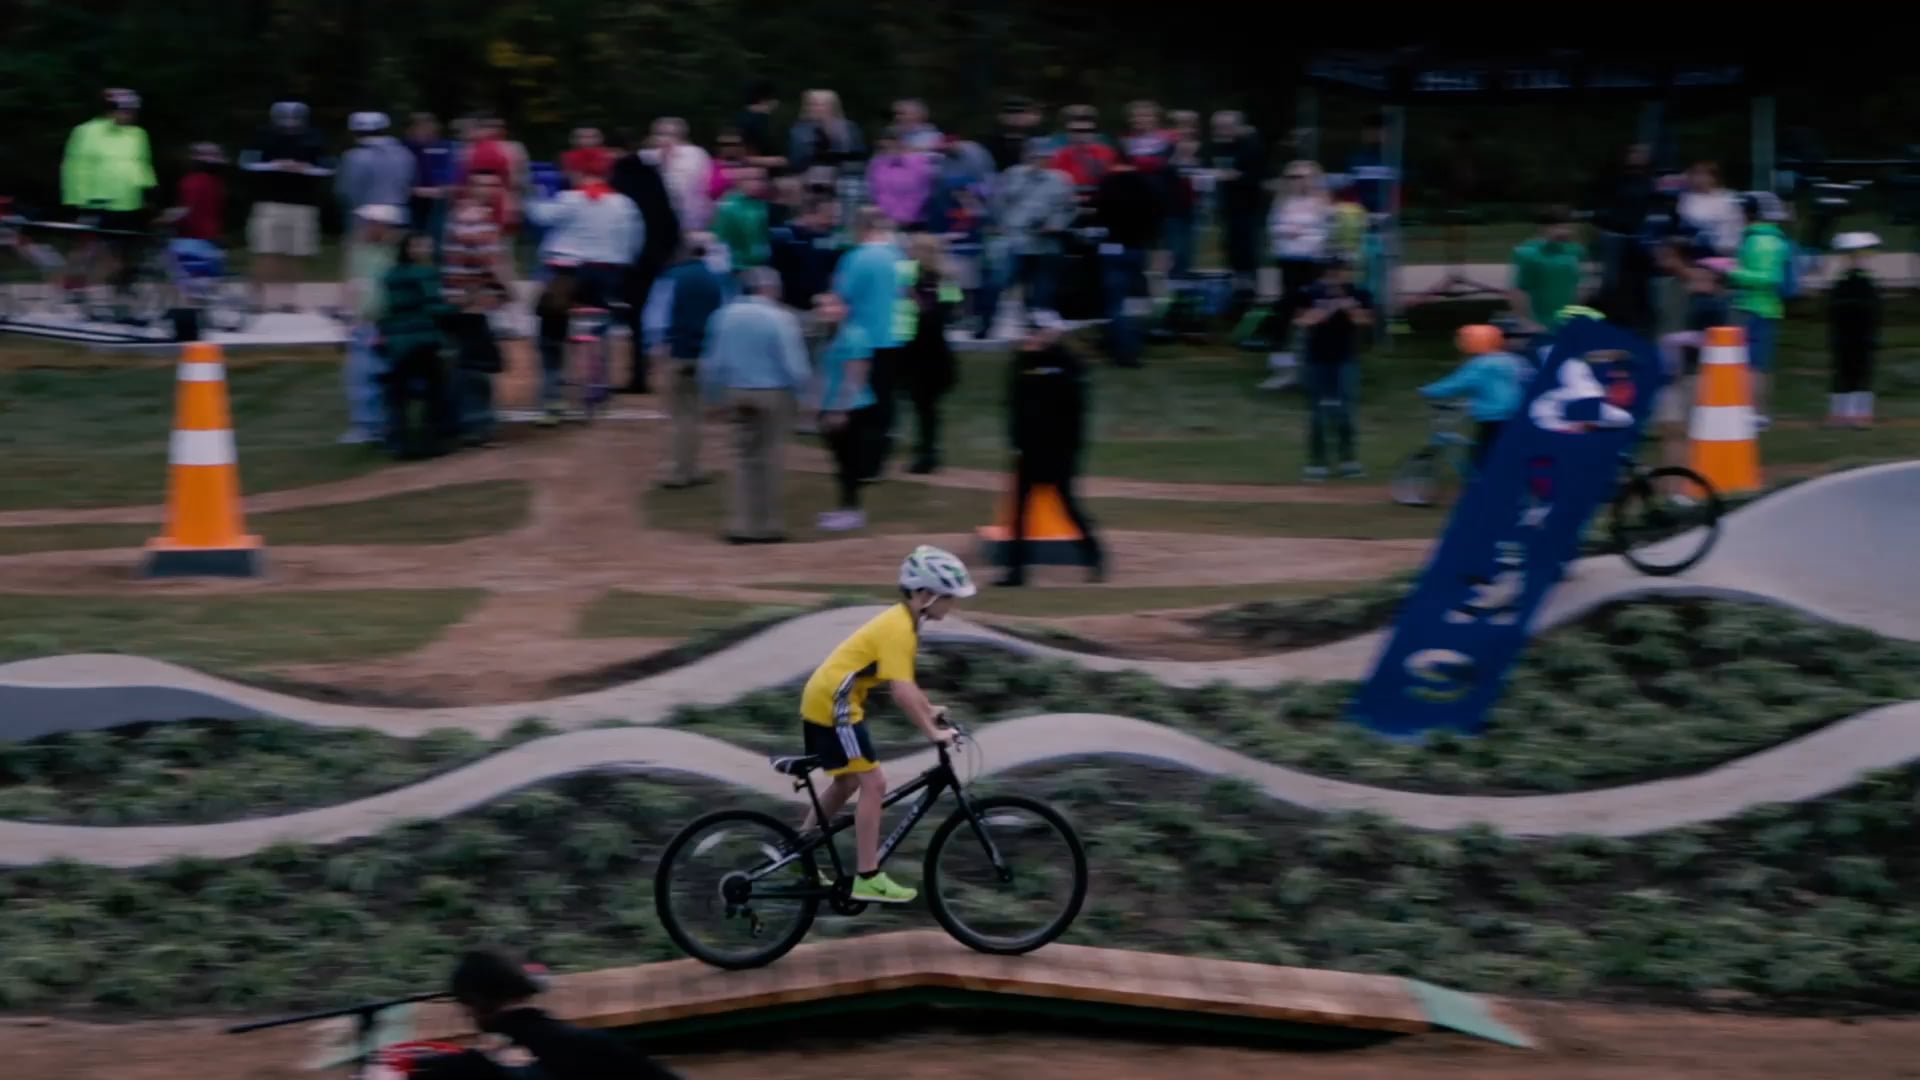 The videos below show examples of bike parks in action.